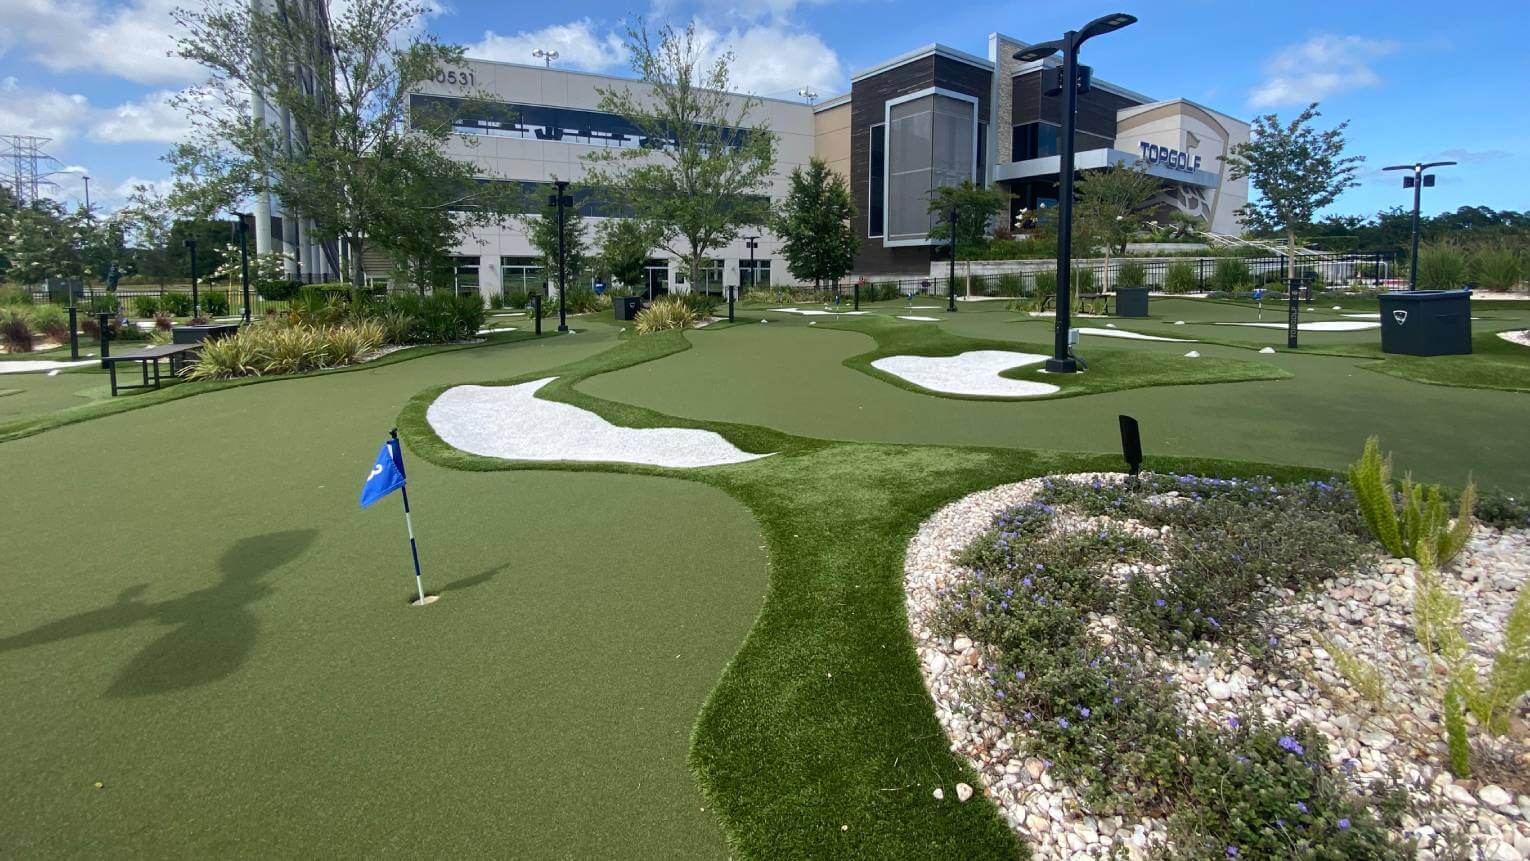 Commercial turf putting green installed by SYNLawn